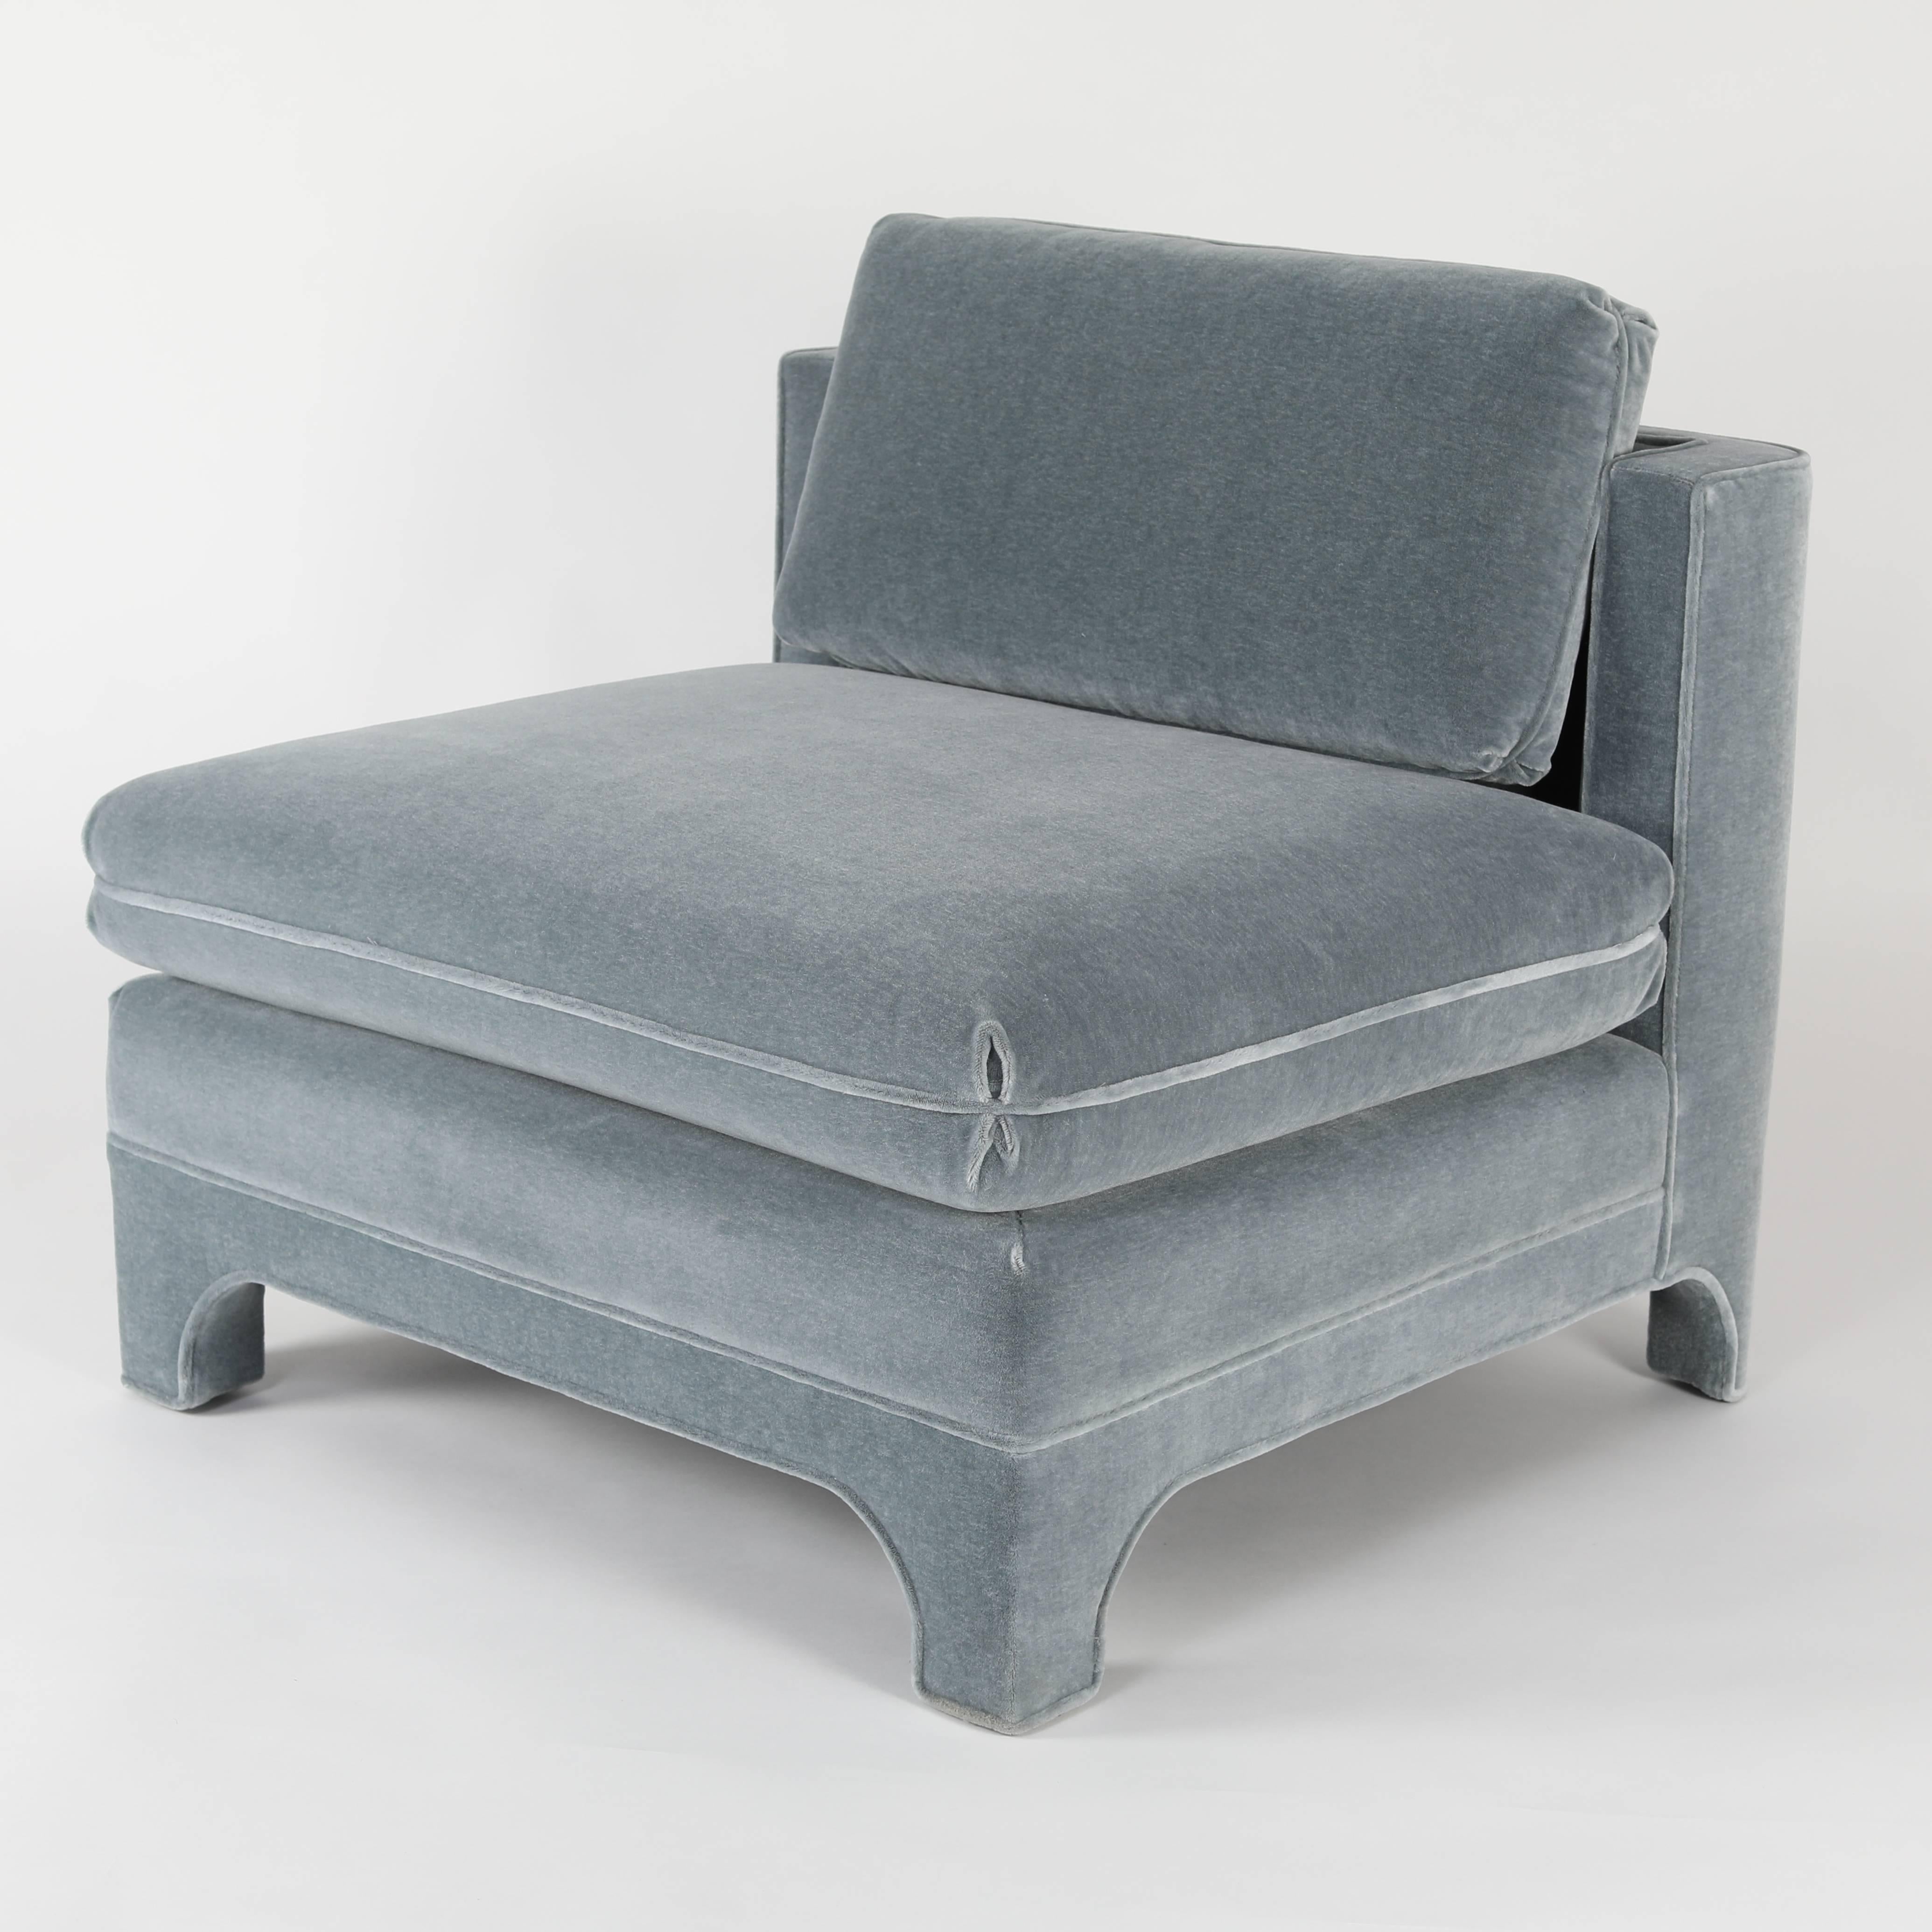 These large and comfortable chairs have been beautifully restored in a cool, medium-blue mohair with a touch of grey. Fully upholstered with simple lines and just the right amount of detail, including arched feet and a notched back that accommodates